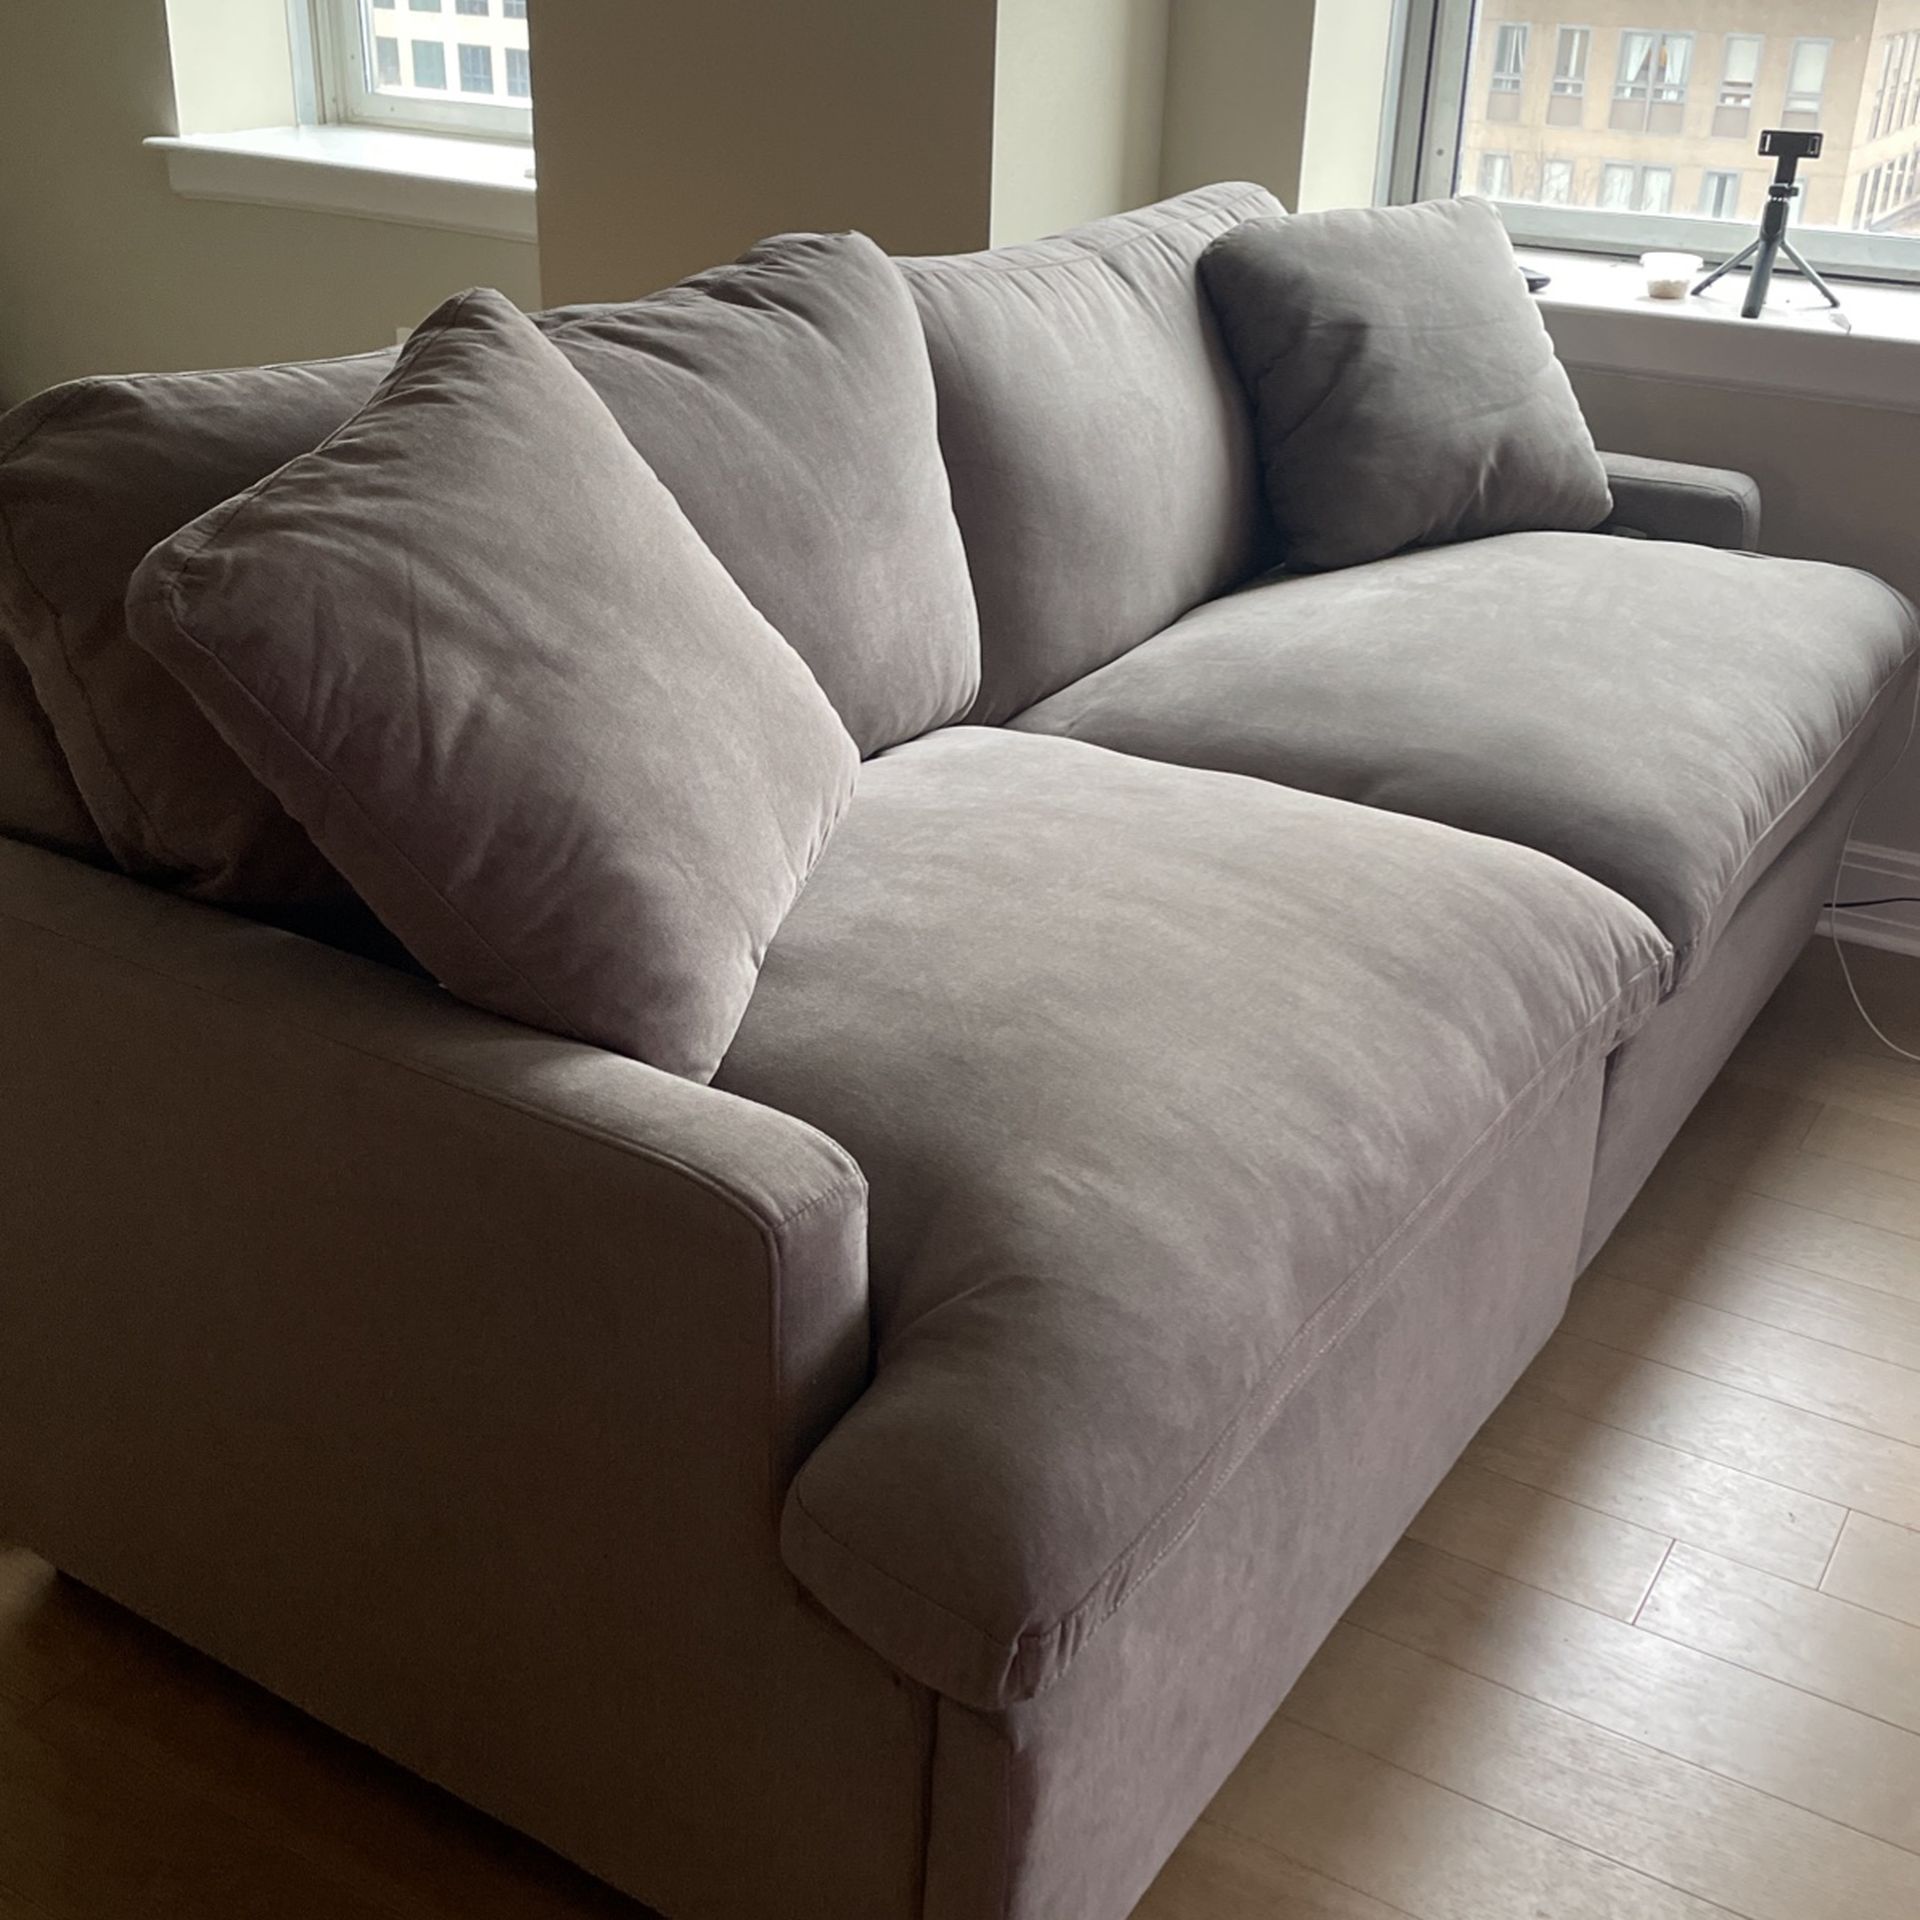 Modular Plush Couch W/ USB Port And Recliner 